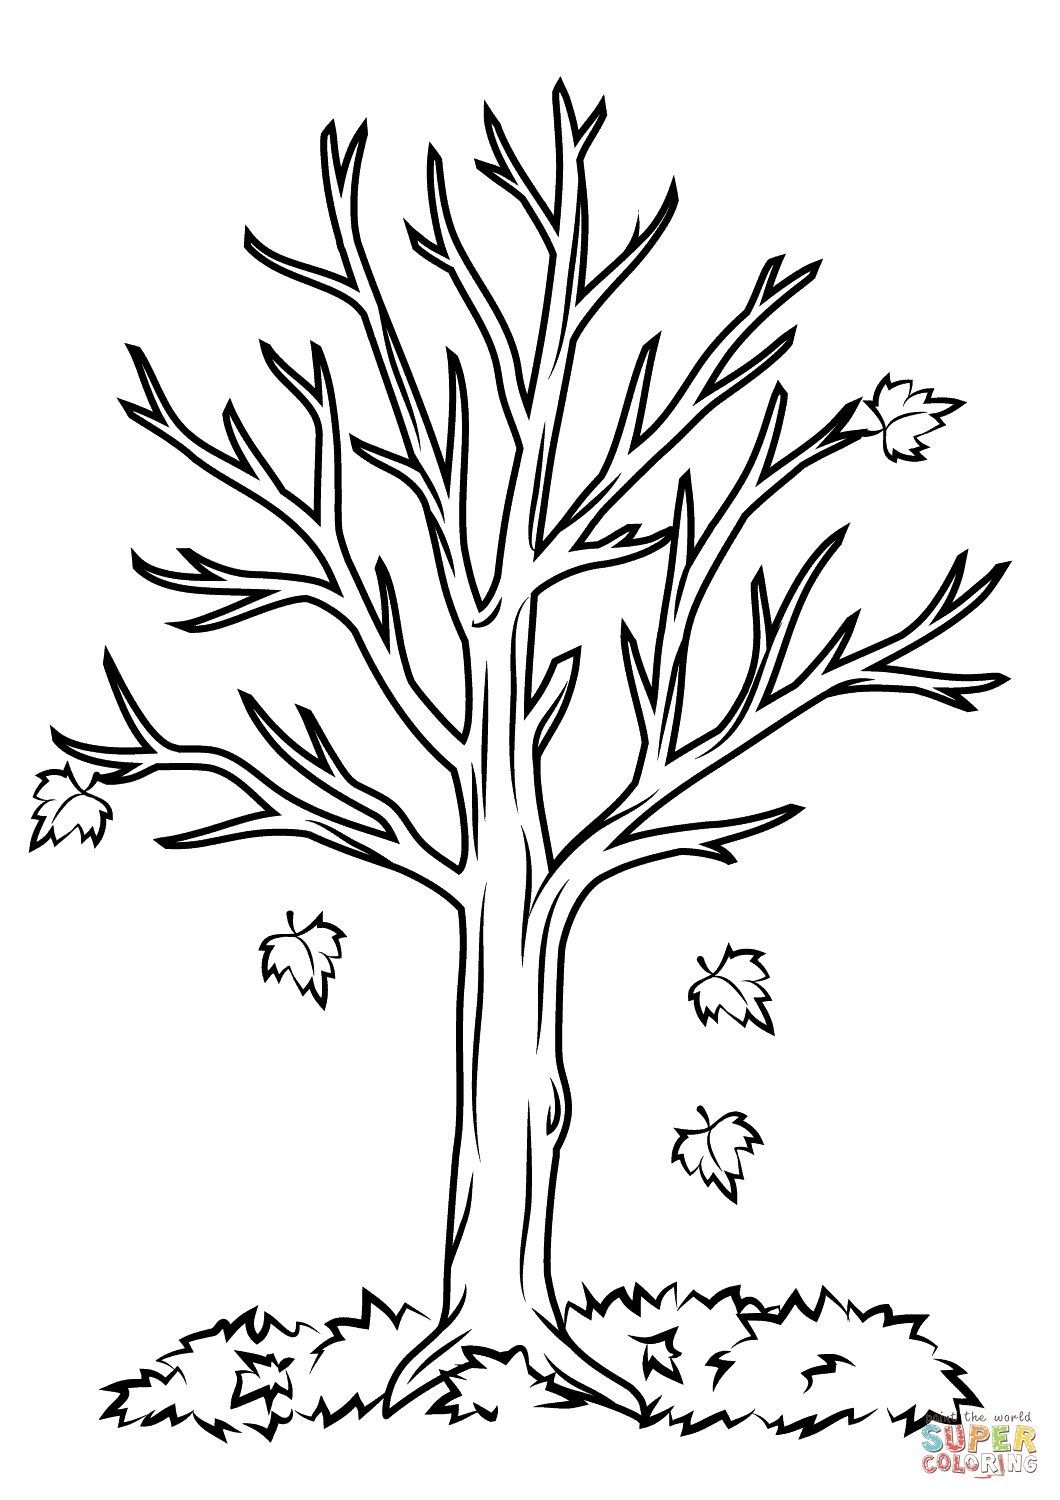 Fall Coloring Pages For Kids Fall Tree Coloring Page Free mit Herbstbaum Zum Ausmalen